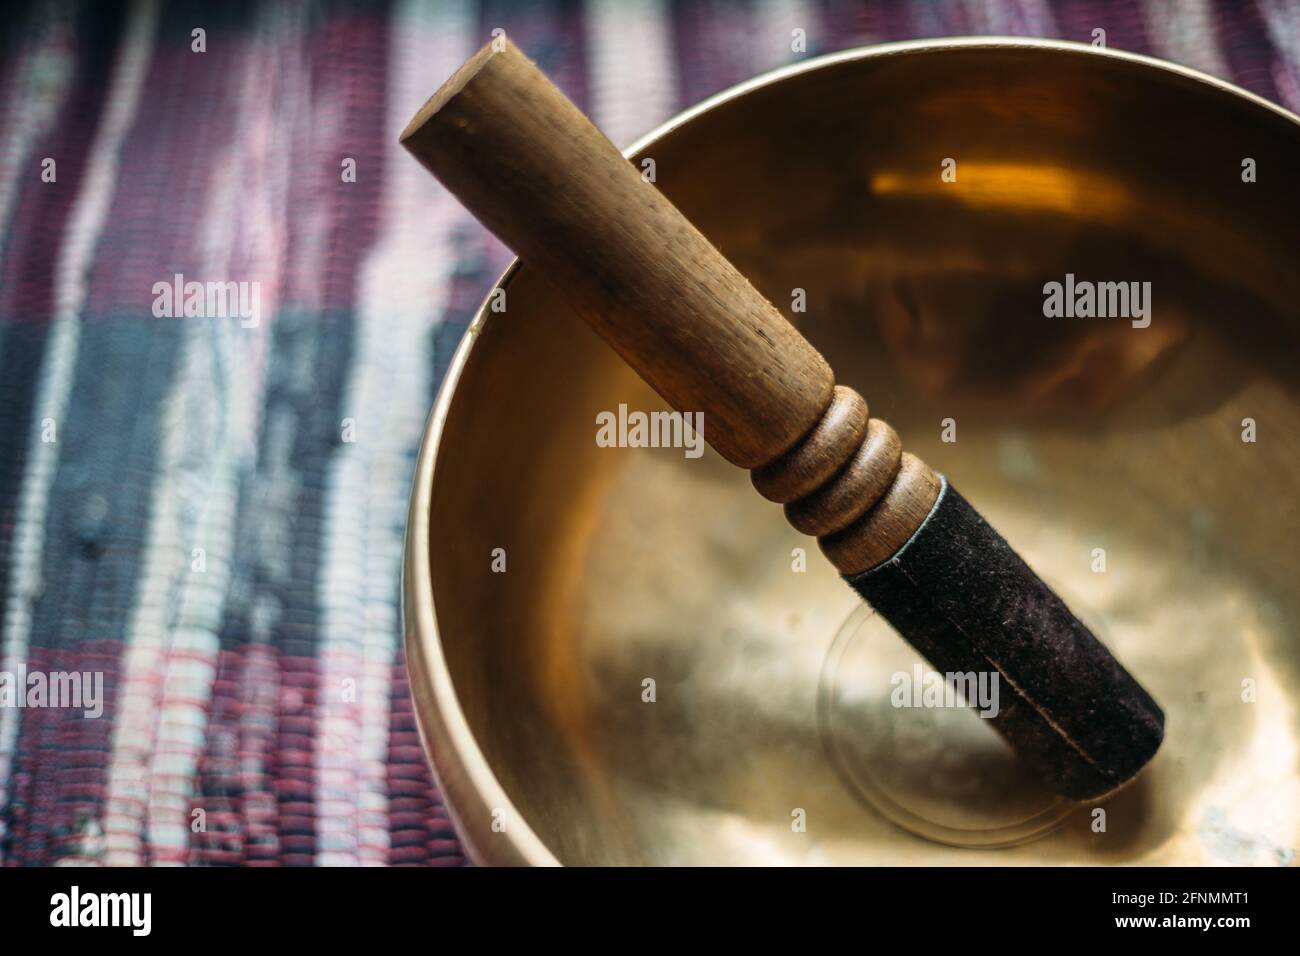 Tibetan singing bowl with a stick on a handmade woven carpet. Stock Photo